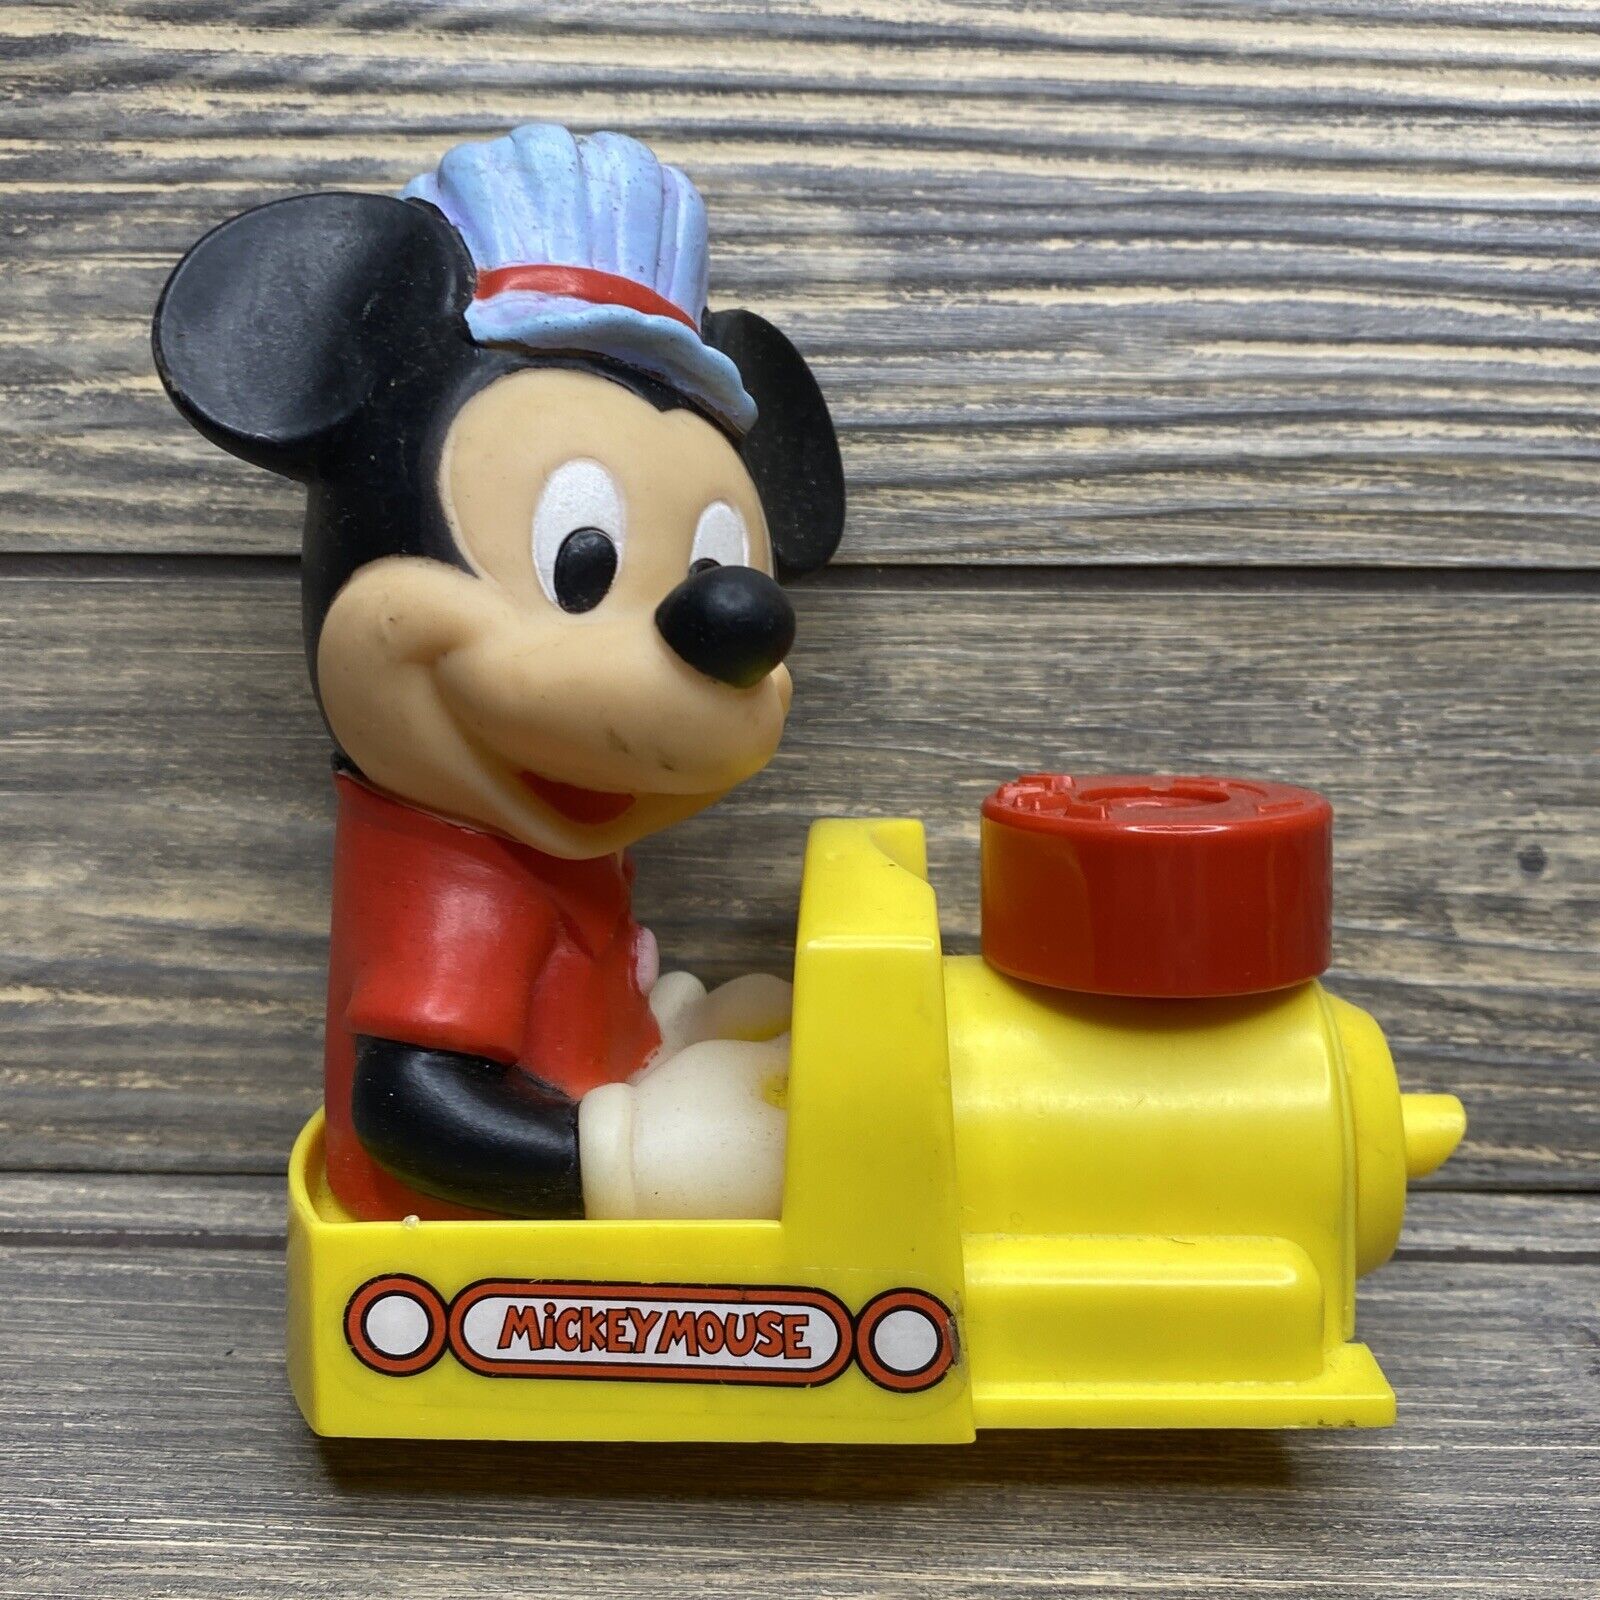 Vtg Disney 1987 Mickey Mouse Wind Up Train Yellow Engine Replacement Part Piece